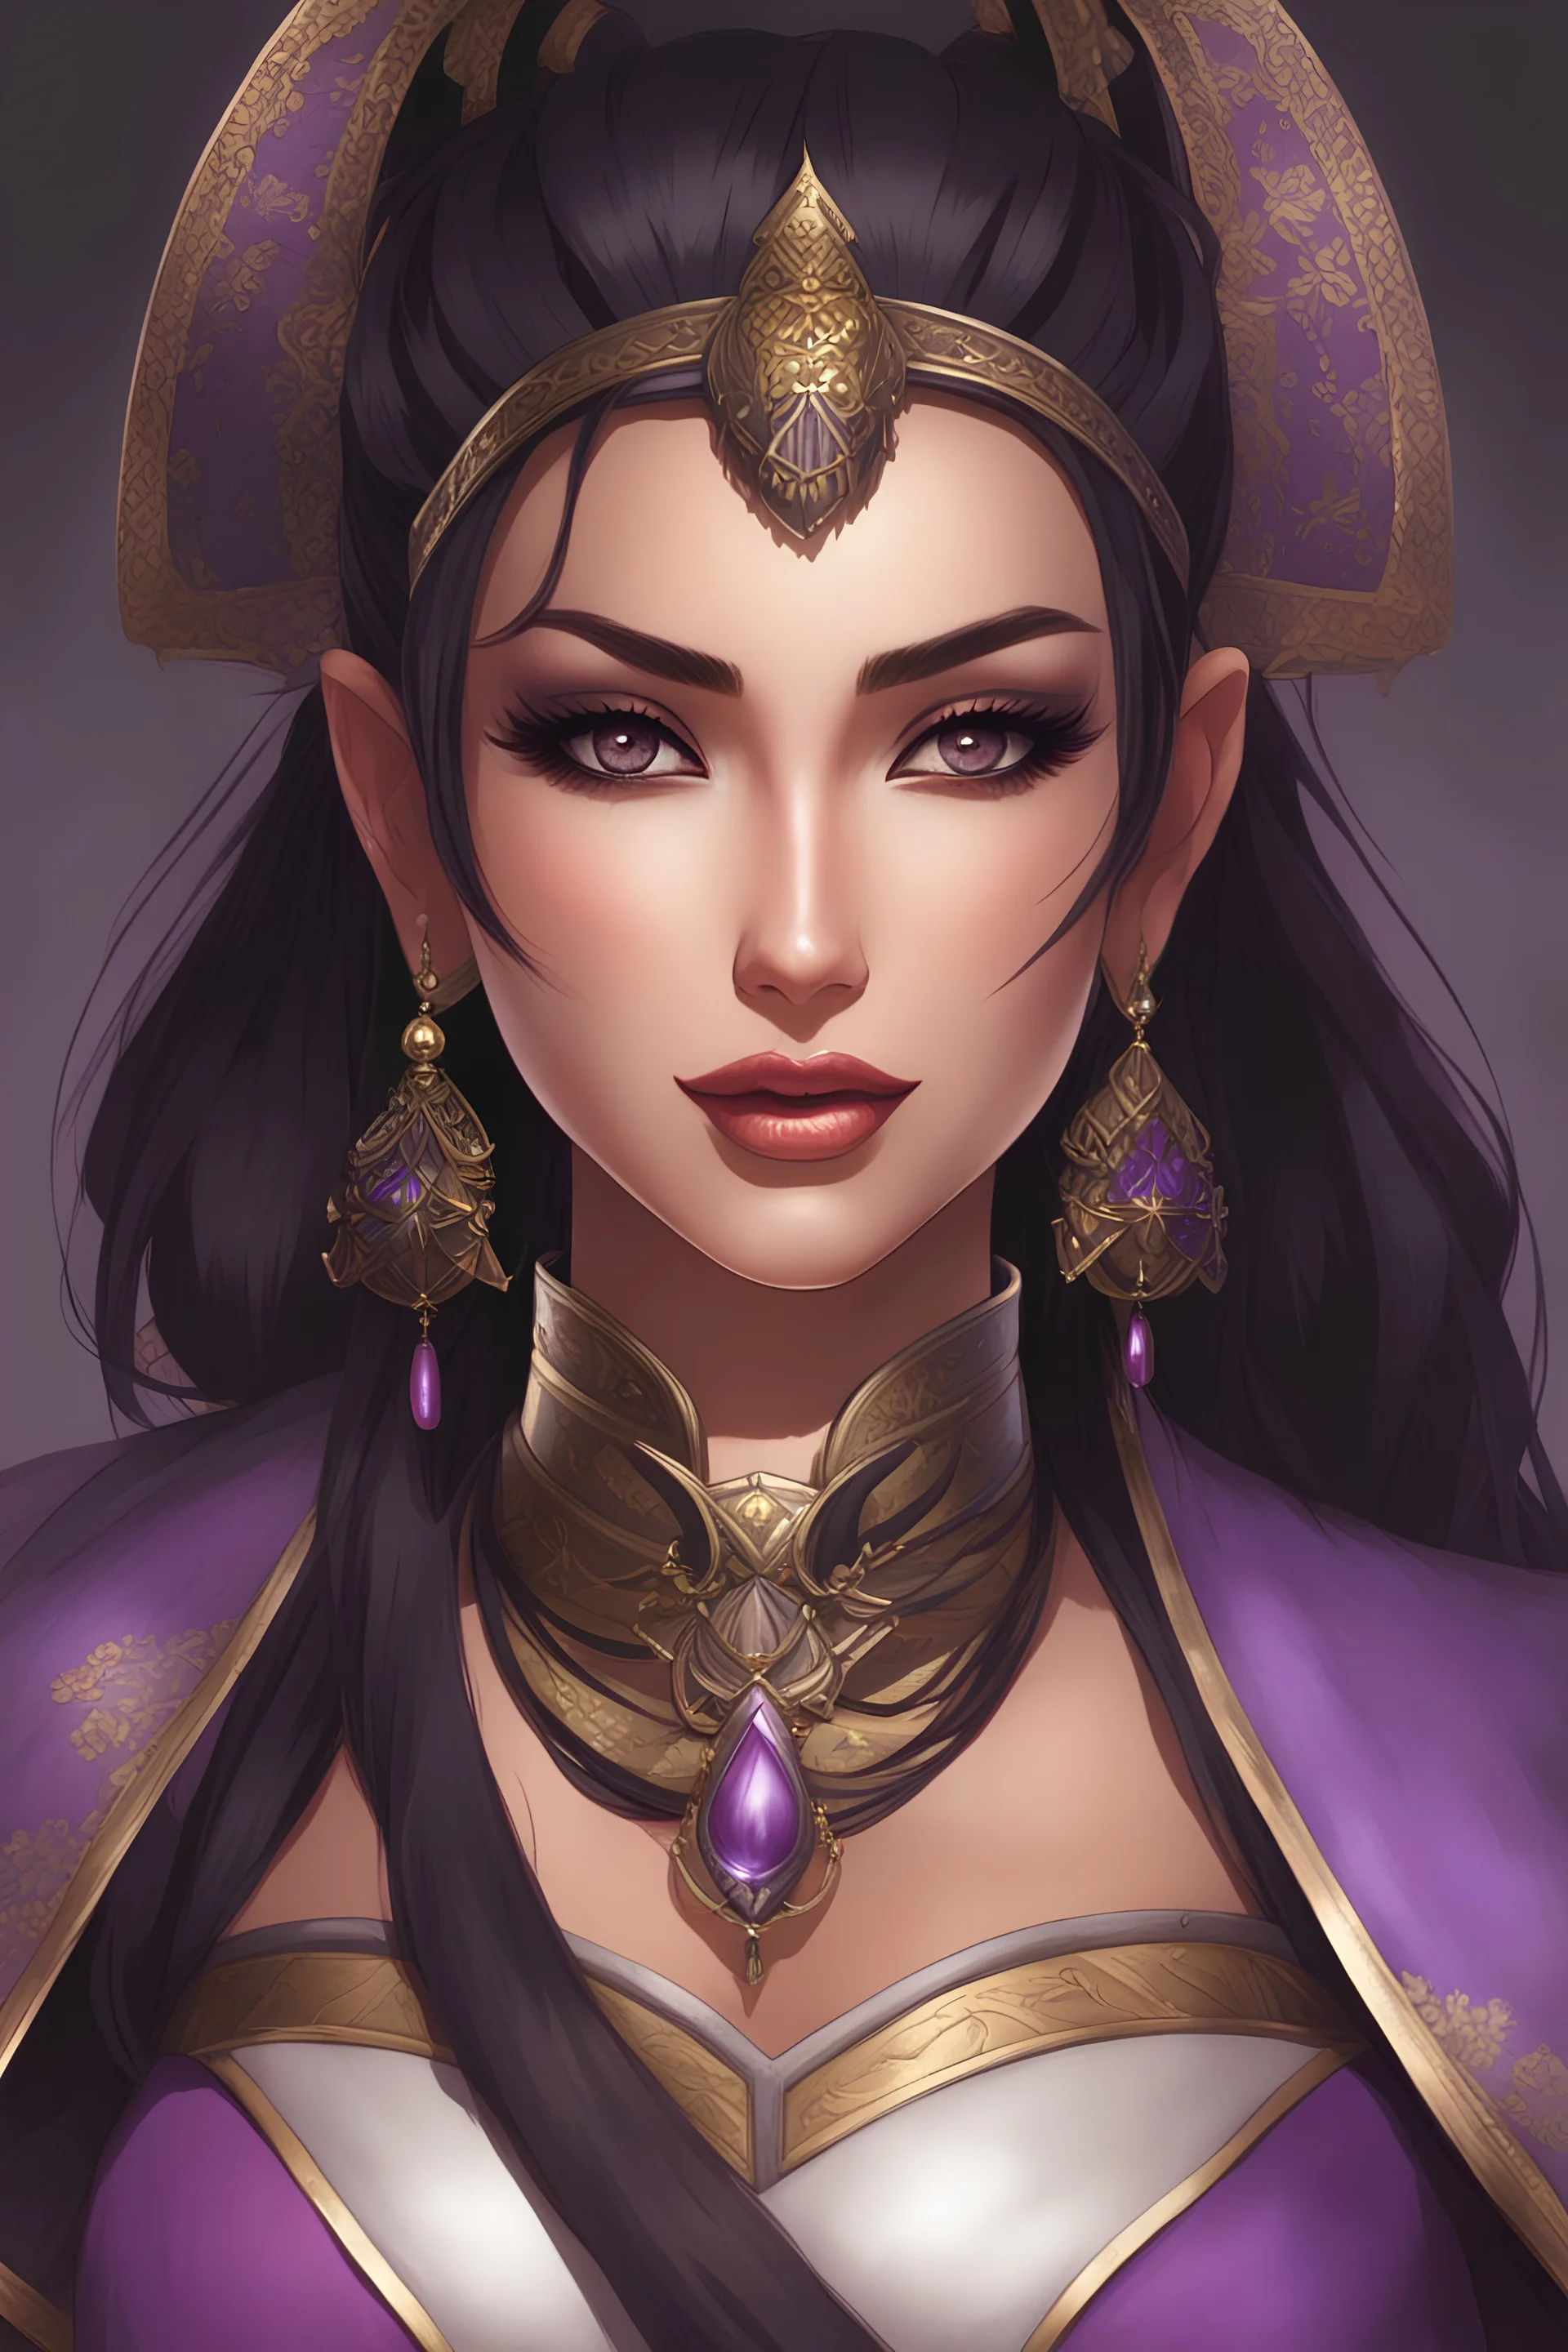 A female persian warrior princess, D cup, feudal japan, RPG character, travelling merchant, exotic, black hair in ponytail, perfect eyes, purple eyes, dark eyeshadows, long eyelashes, perfect face, perfect smile,curvaceous, hourglass body, stunning beautiful artwork, 8k, alluring, makeup, lipstick, detailed purple eyes, beautiful face, full body,perfect hands, anime by hiro mashima style, 8k, POV looking at viewer, elephants and desert in background